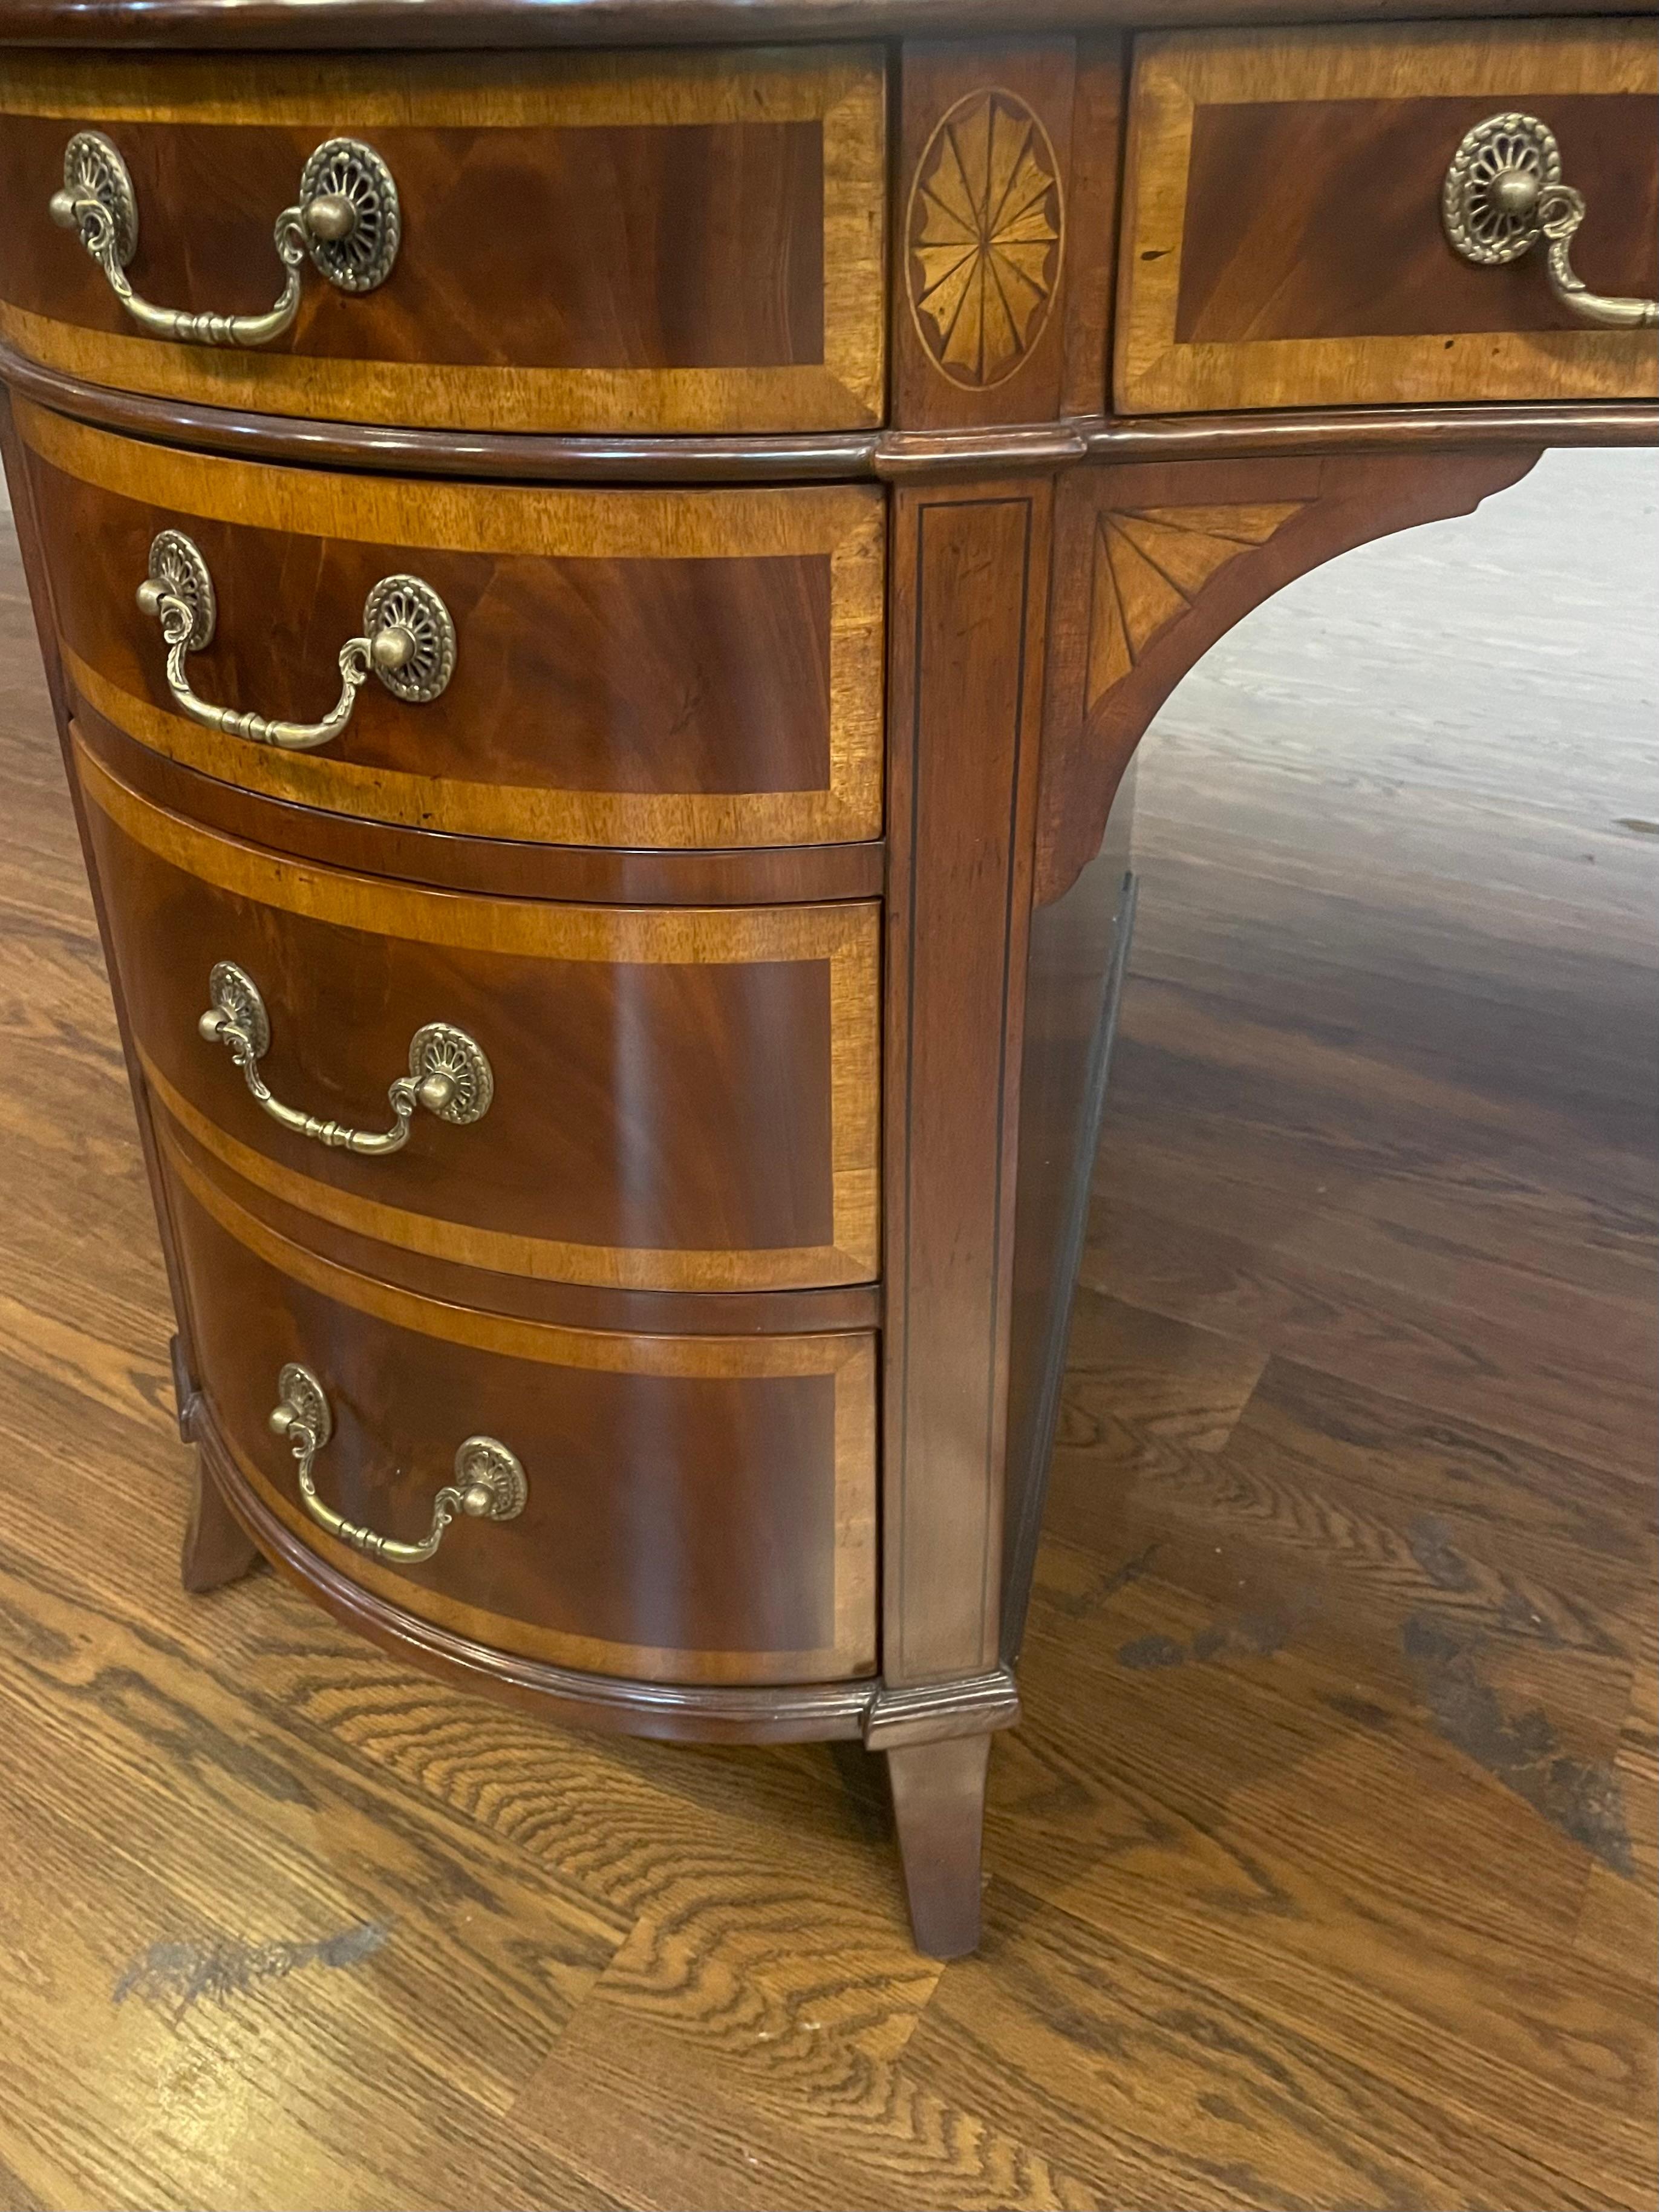 Philippine Mahogany Kidney Shaped Desk by Leighton Hall For Sale